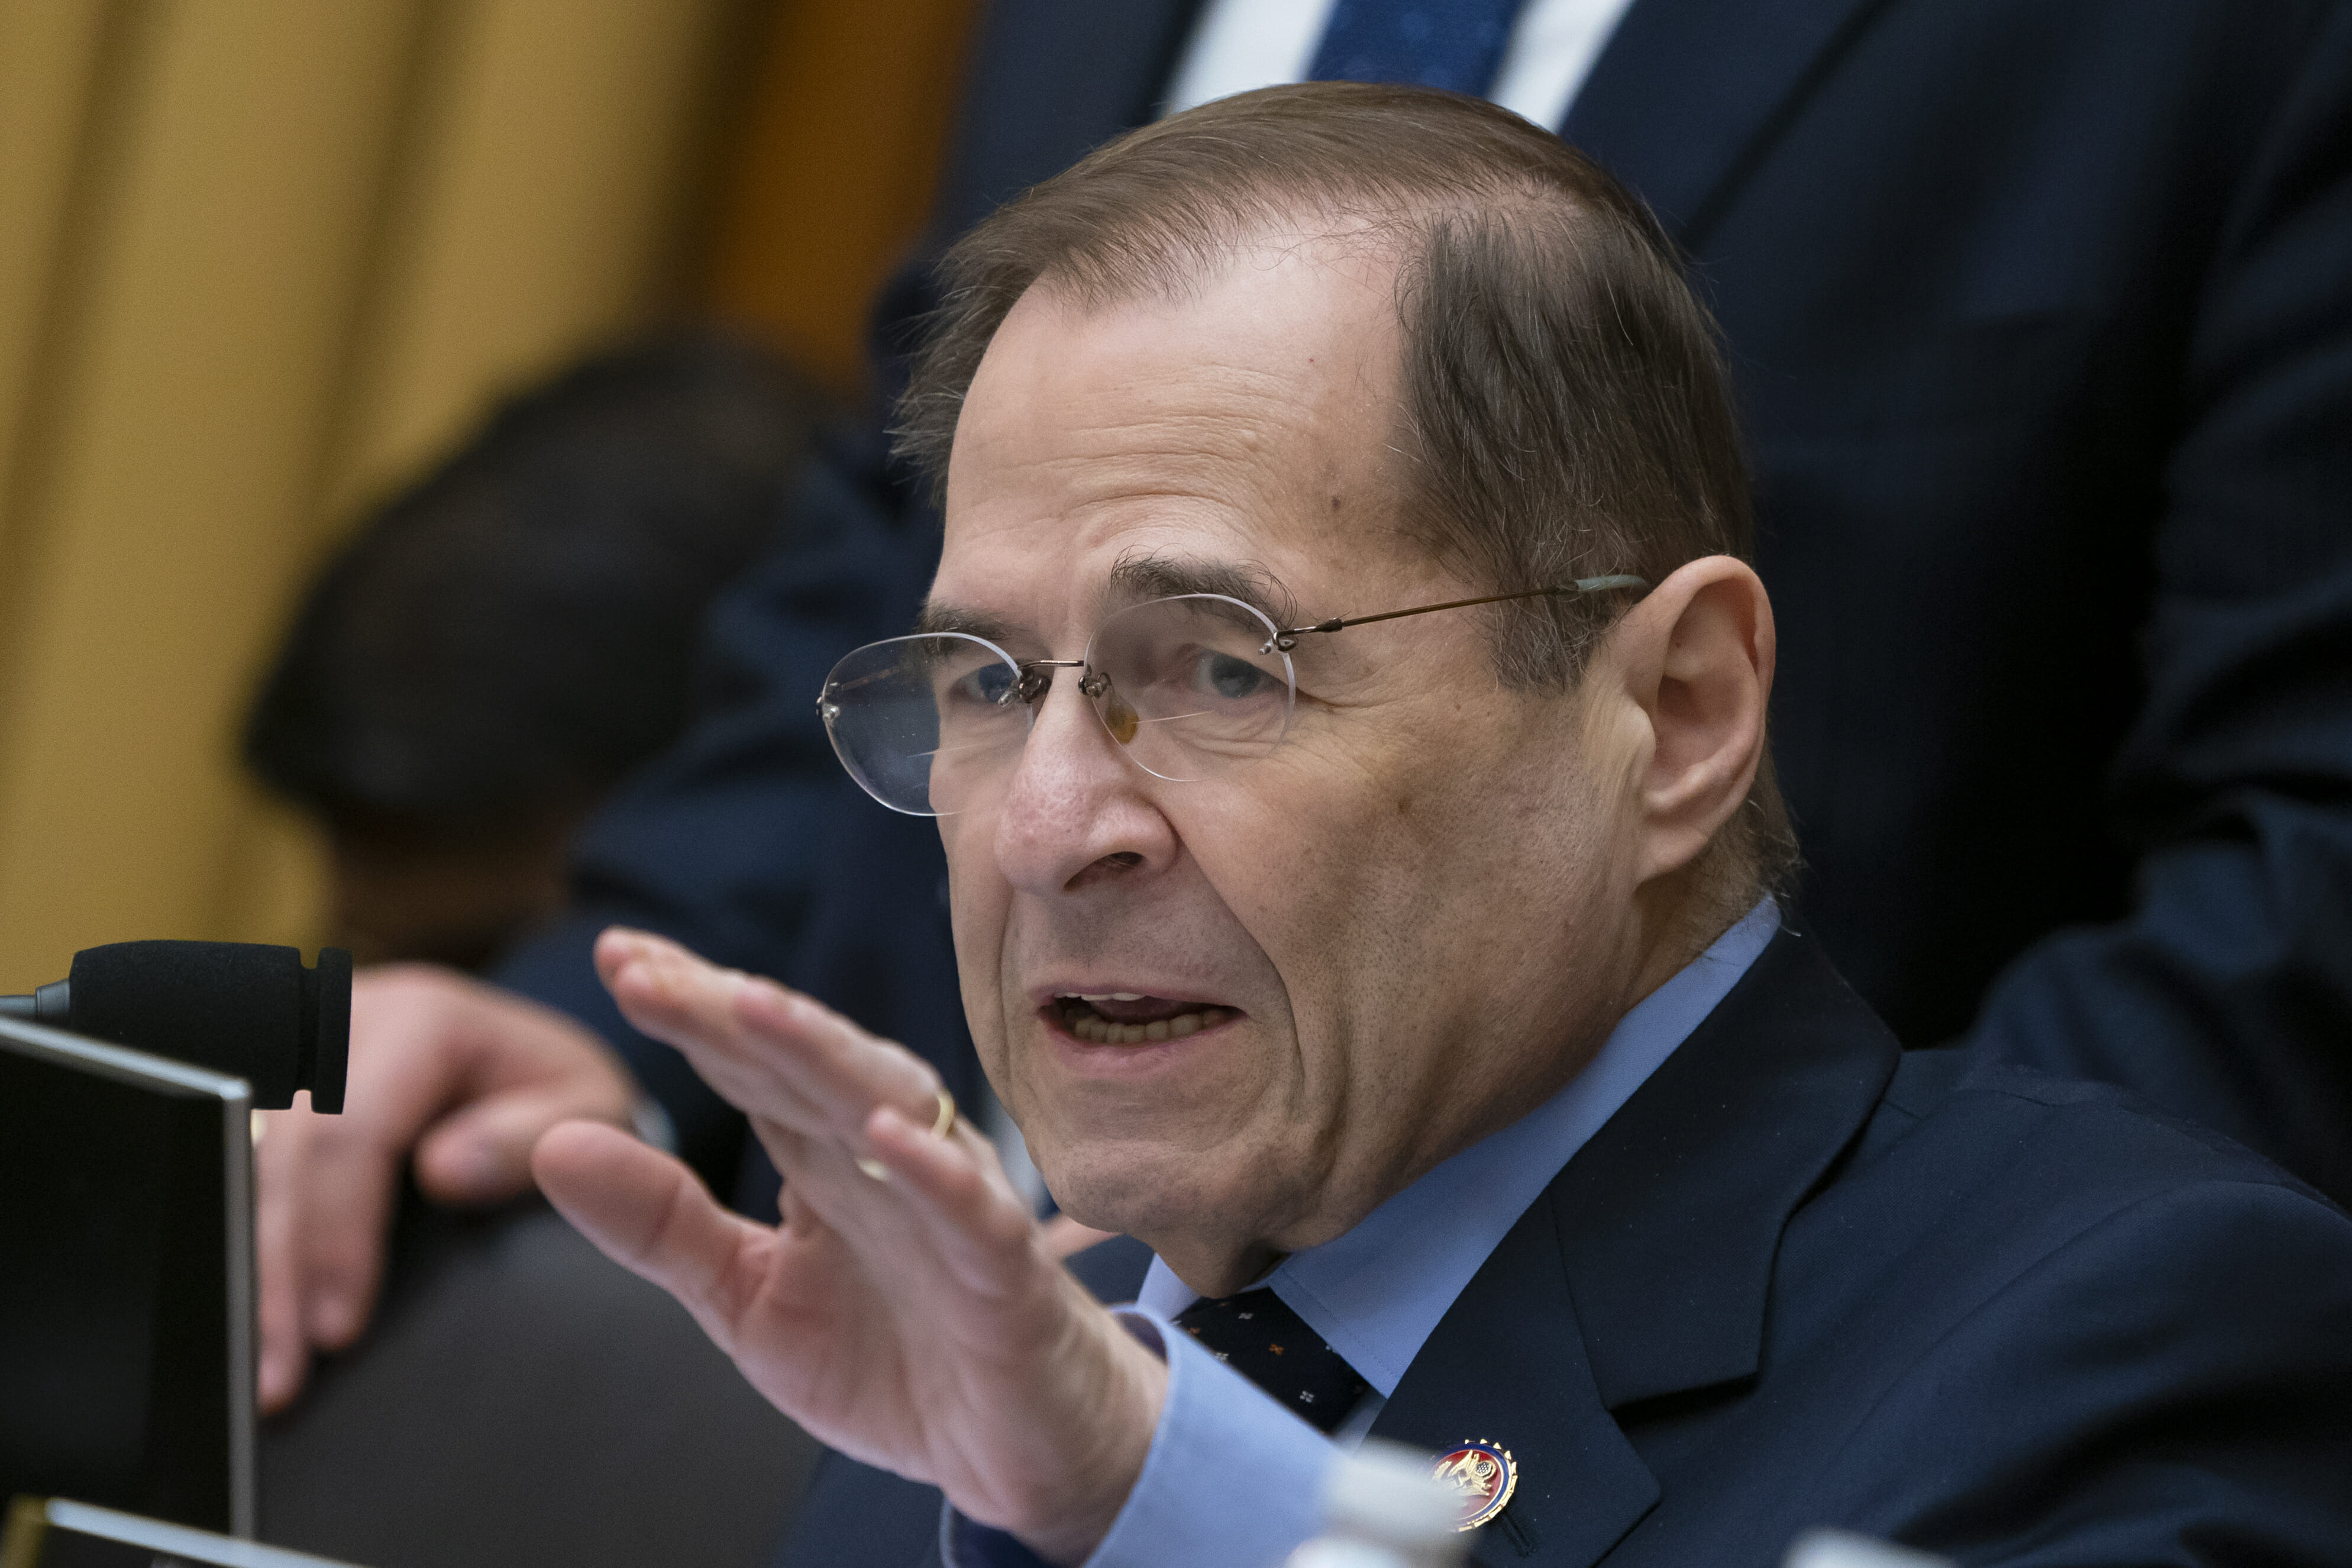 In this Feb. 8, 2019, photo, House Judiciary Committee Chairman Jerrold Nadler, D-N.Y., gestures during questioning of acting Attorney General Matthew Whitaker on Capitol Hill in Washington.